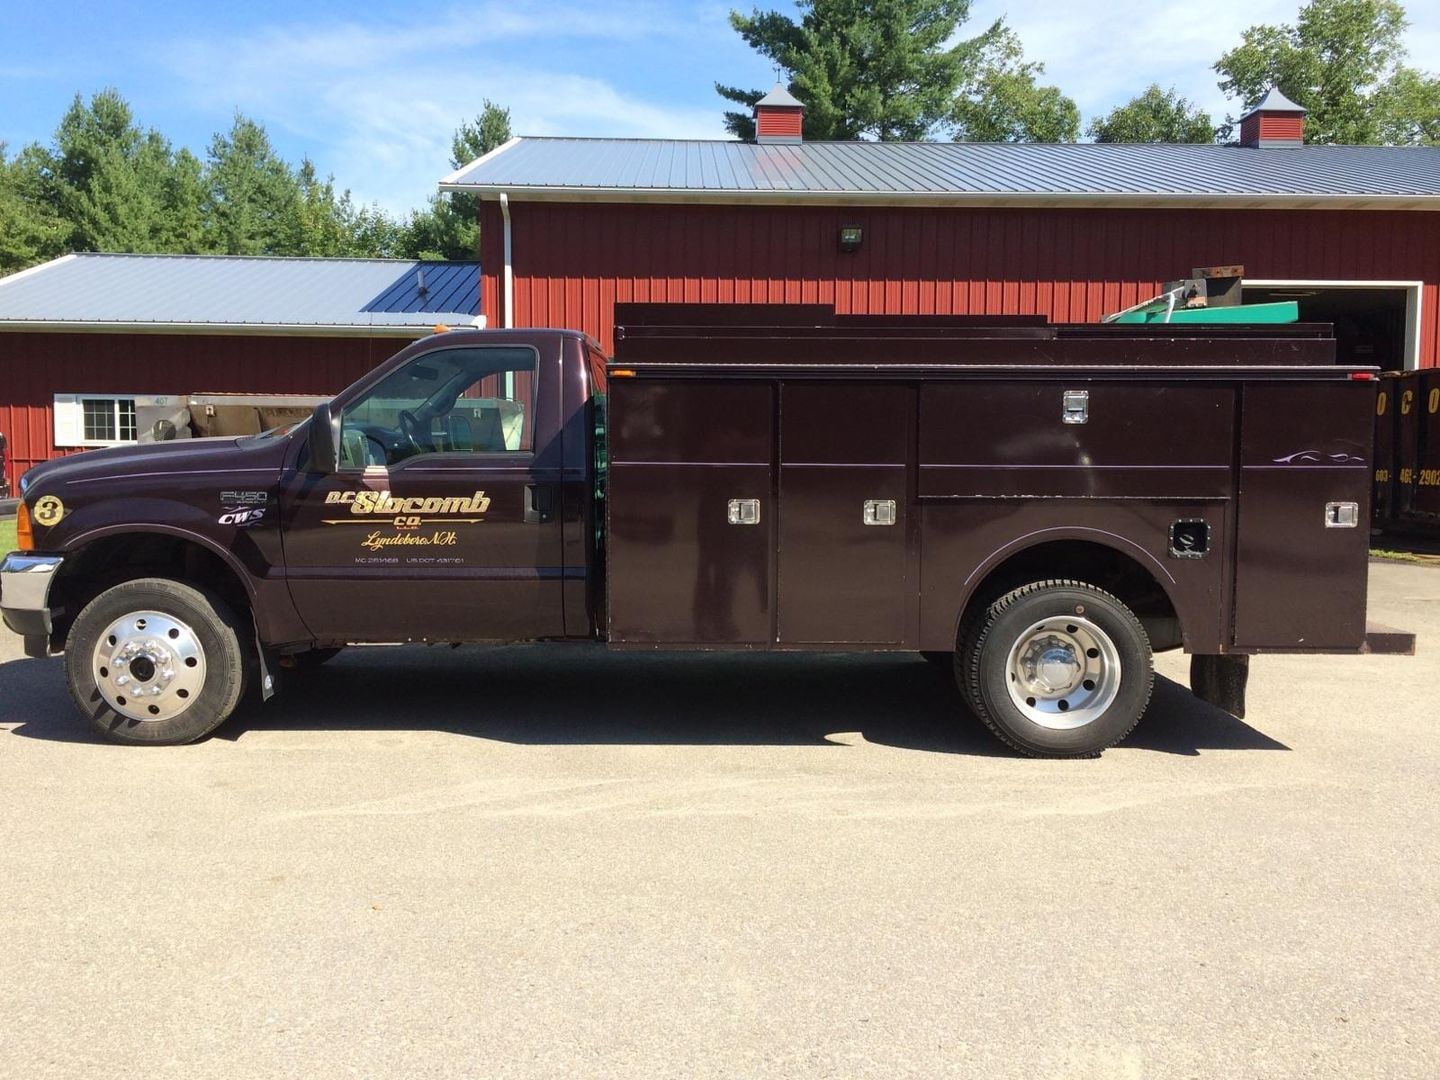 Dumpster Services — Slocomb Truck in Wilton, NH